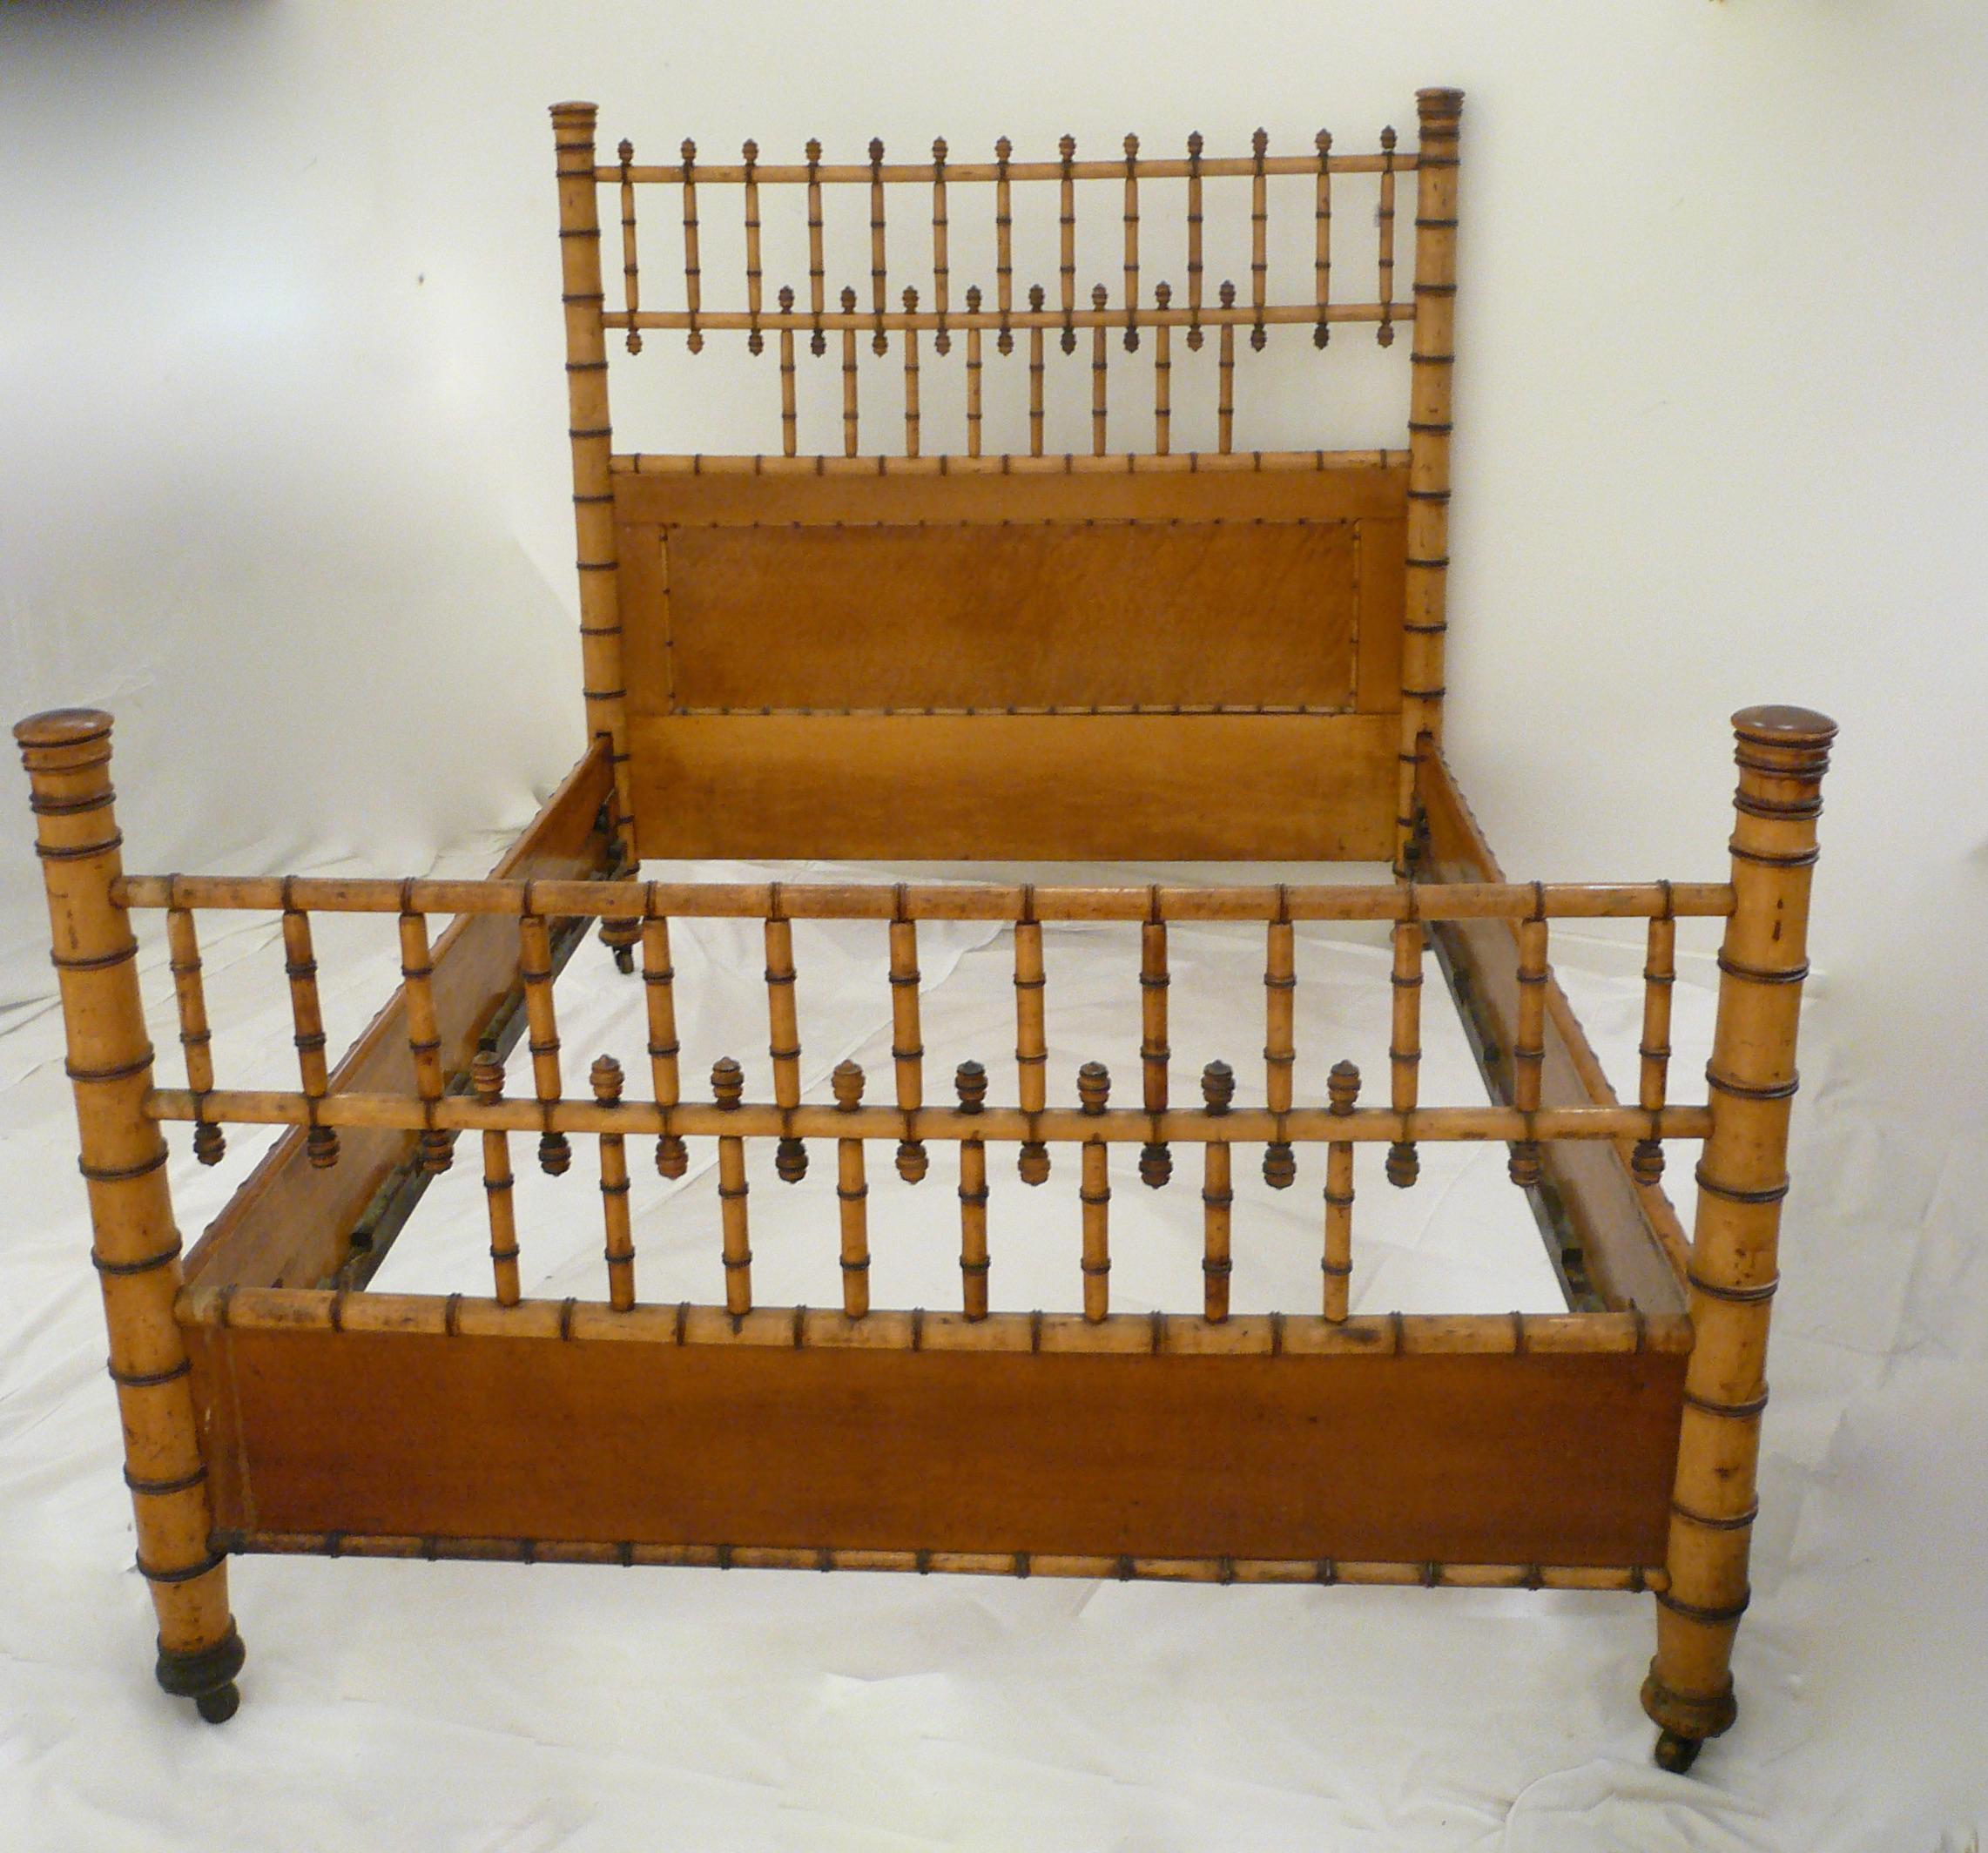 Chinese and Japanese bamboo style furniture reached the height of popularity after the 1876 Philadelphia Centennial Exposition. As the Aesthetic movement intensified so did the demand for Asian inspired decorative arts. R. J. Horner and Company